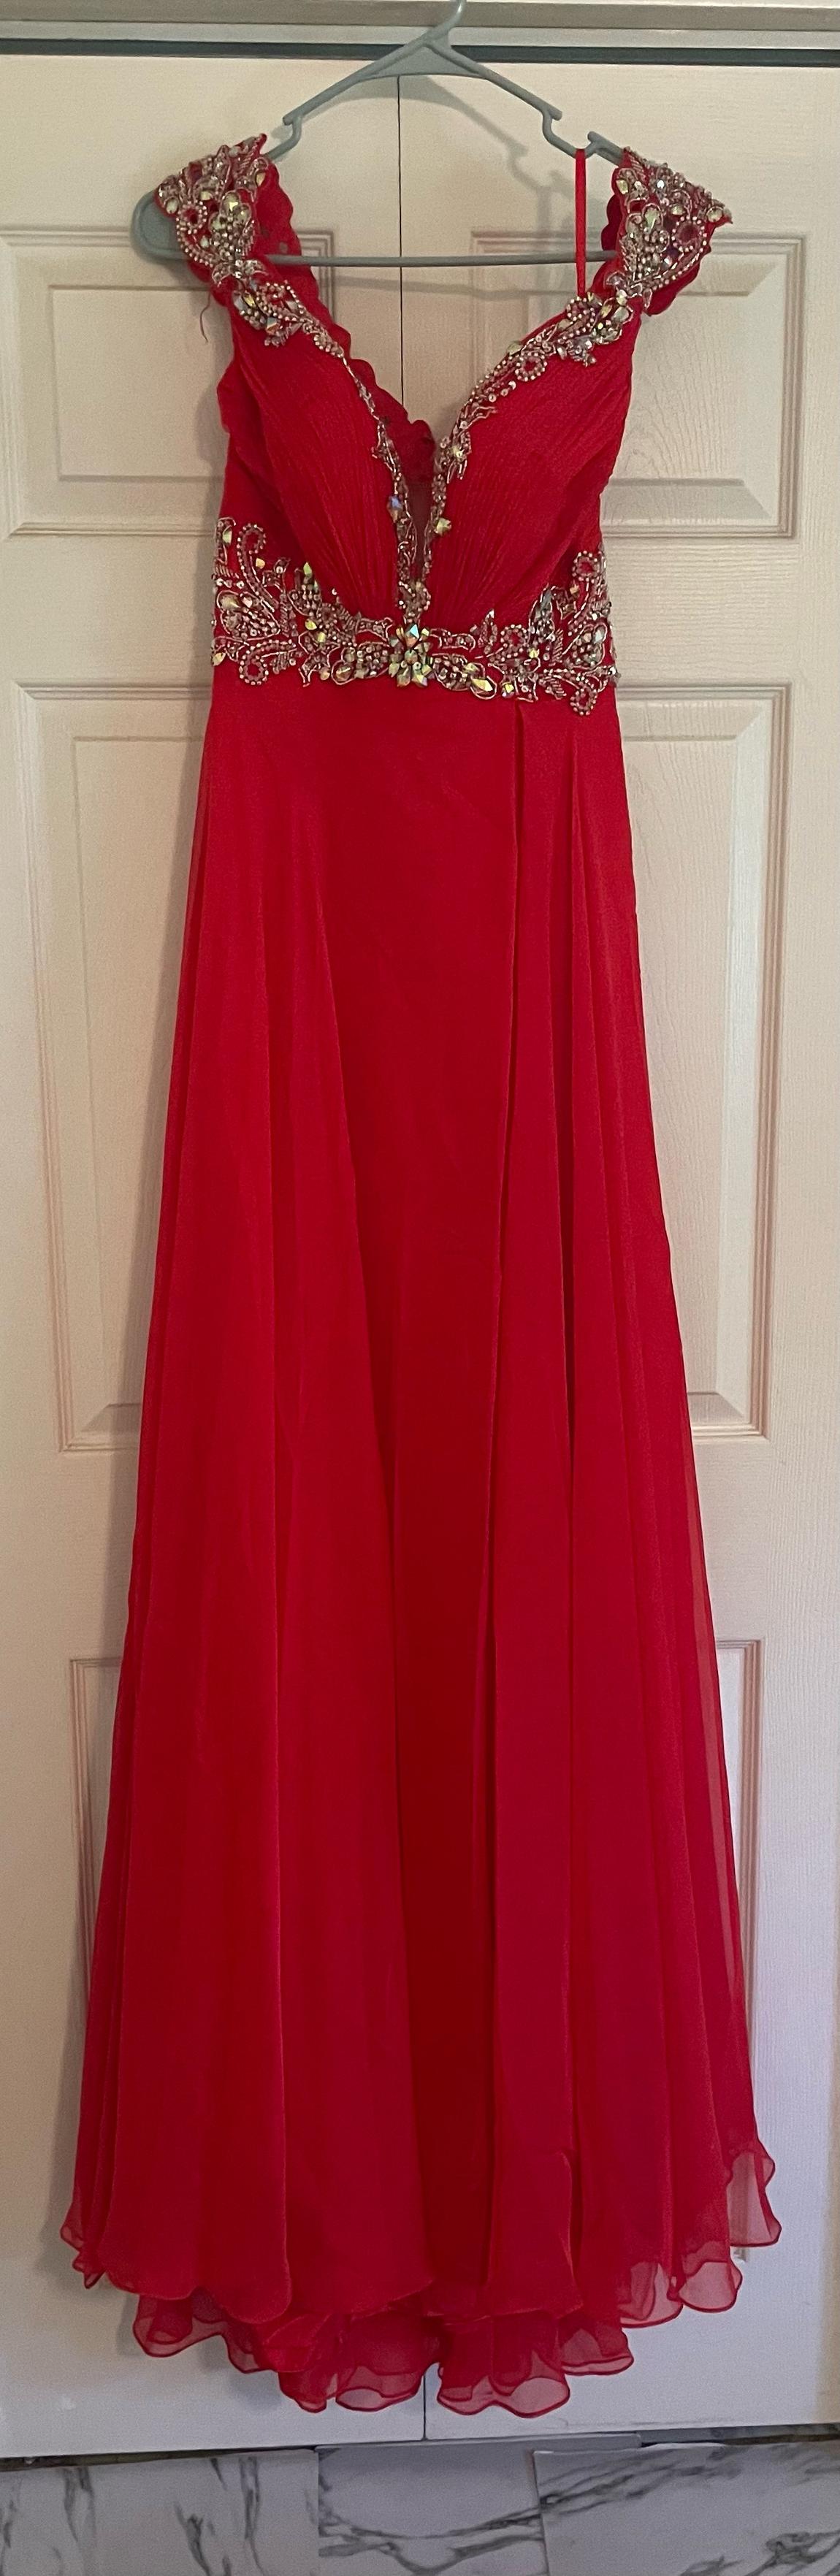 Size 6 Bridesmaid Sequined Red A-line Dress on Queenly